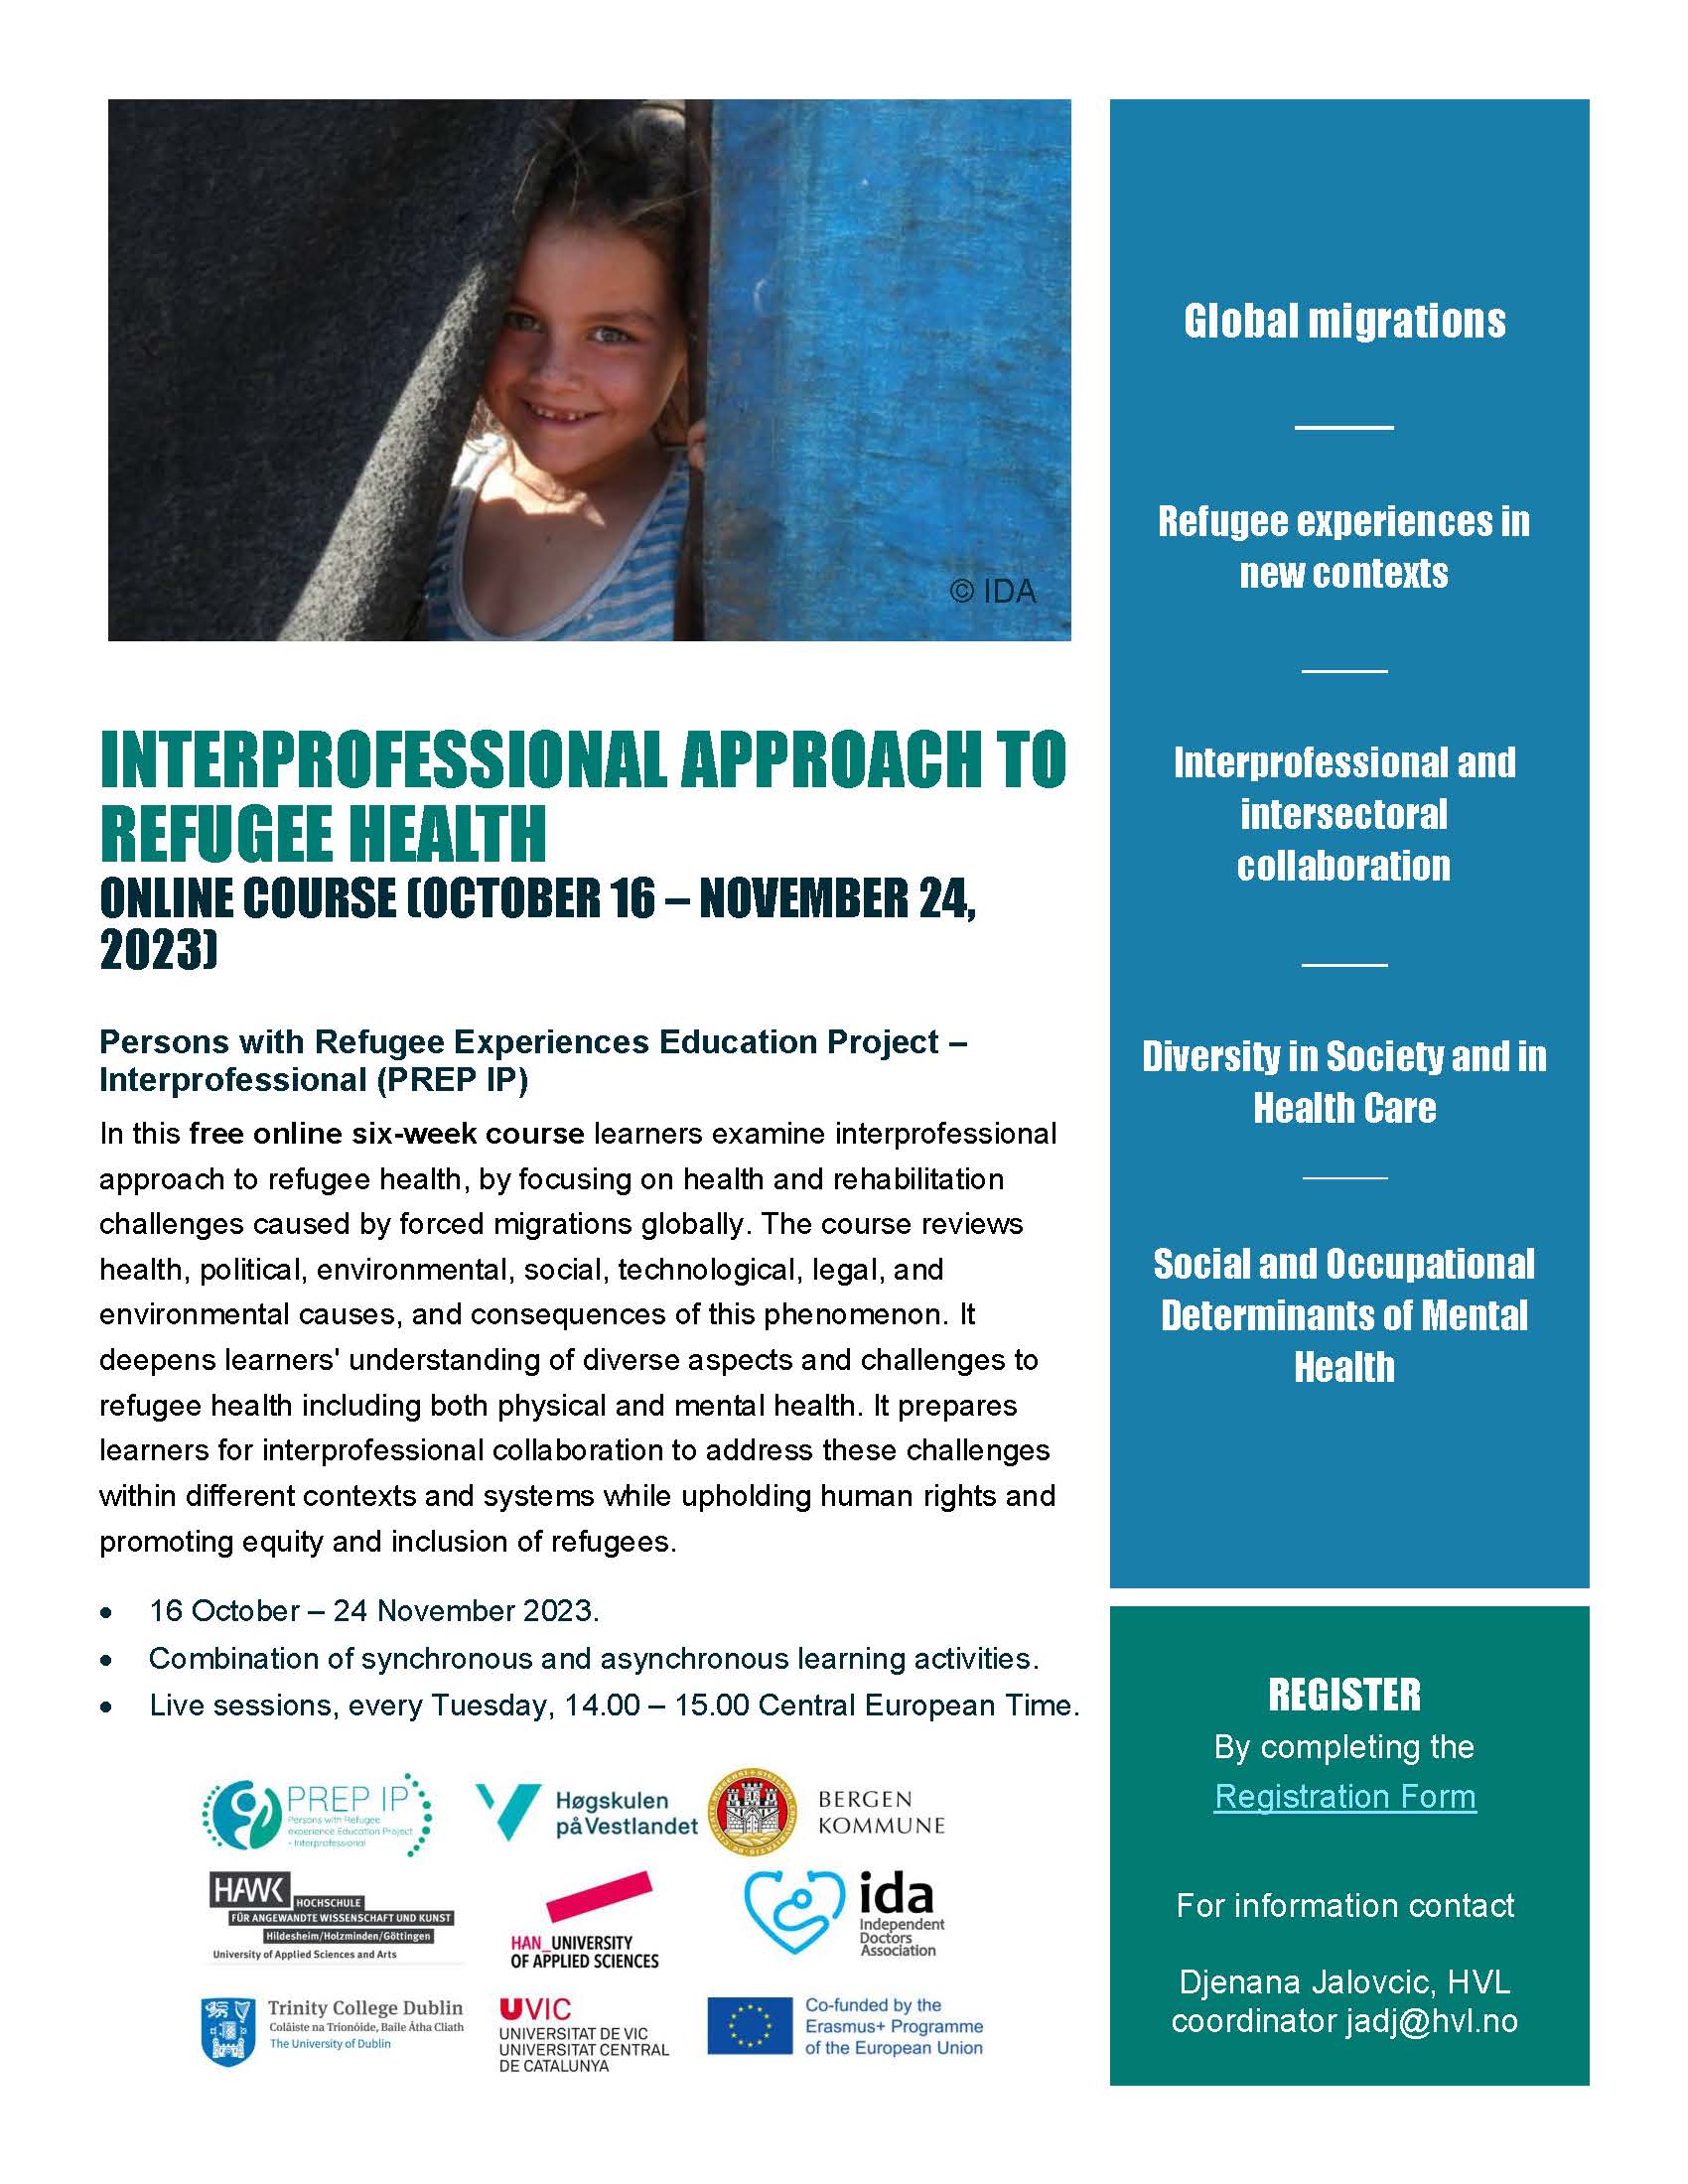 Interprofessional approach to refugee health: online course